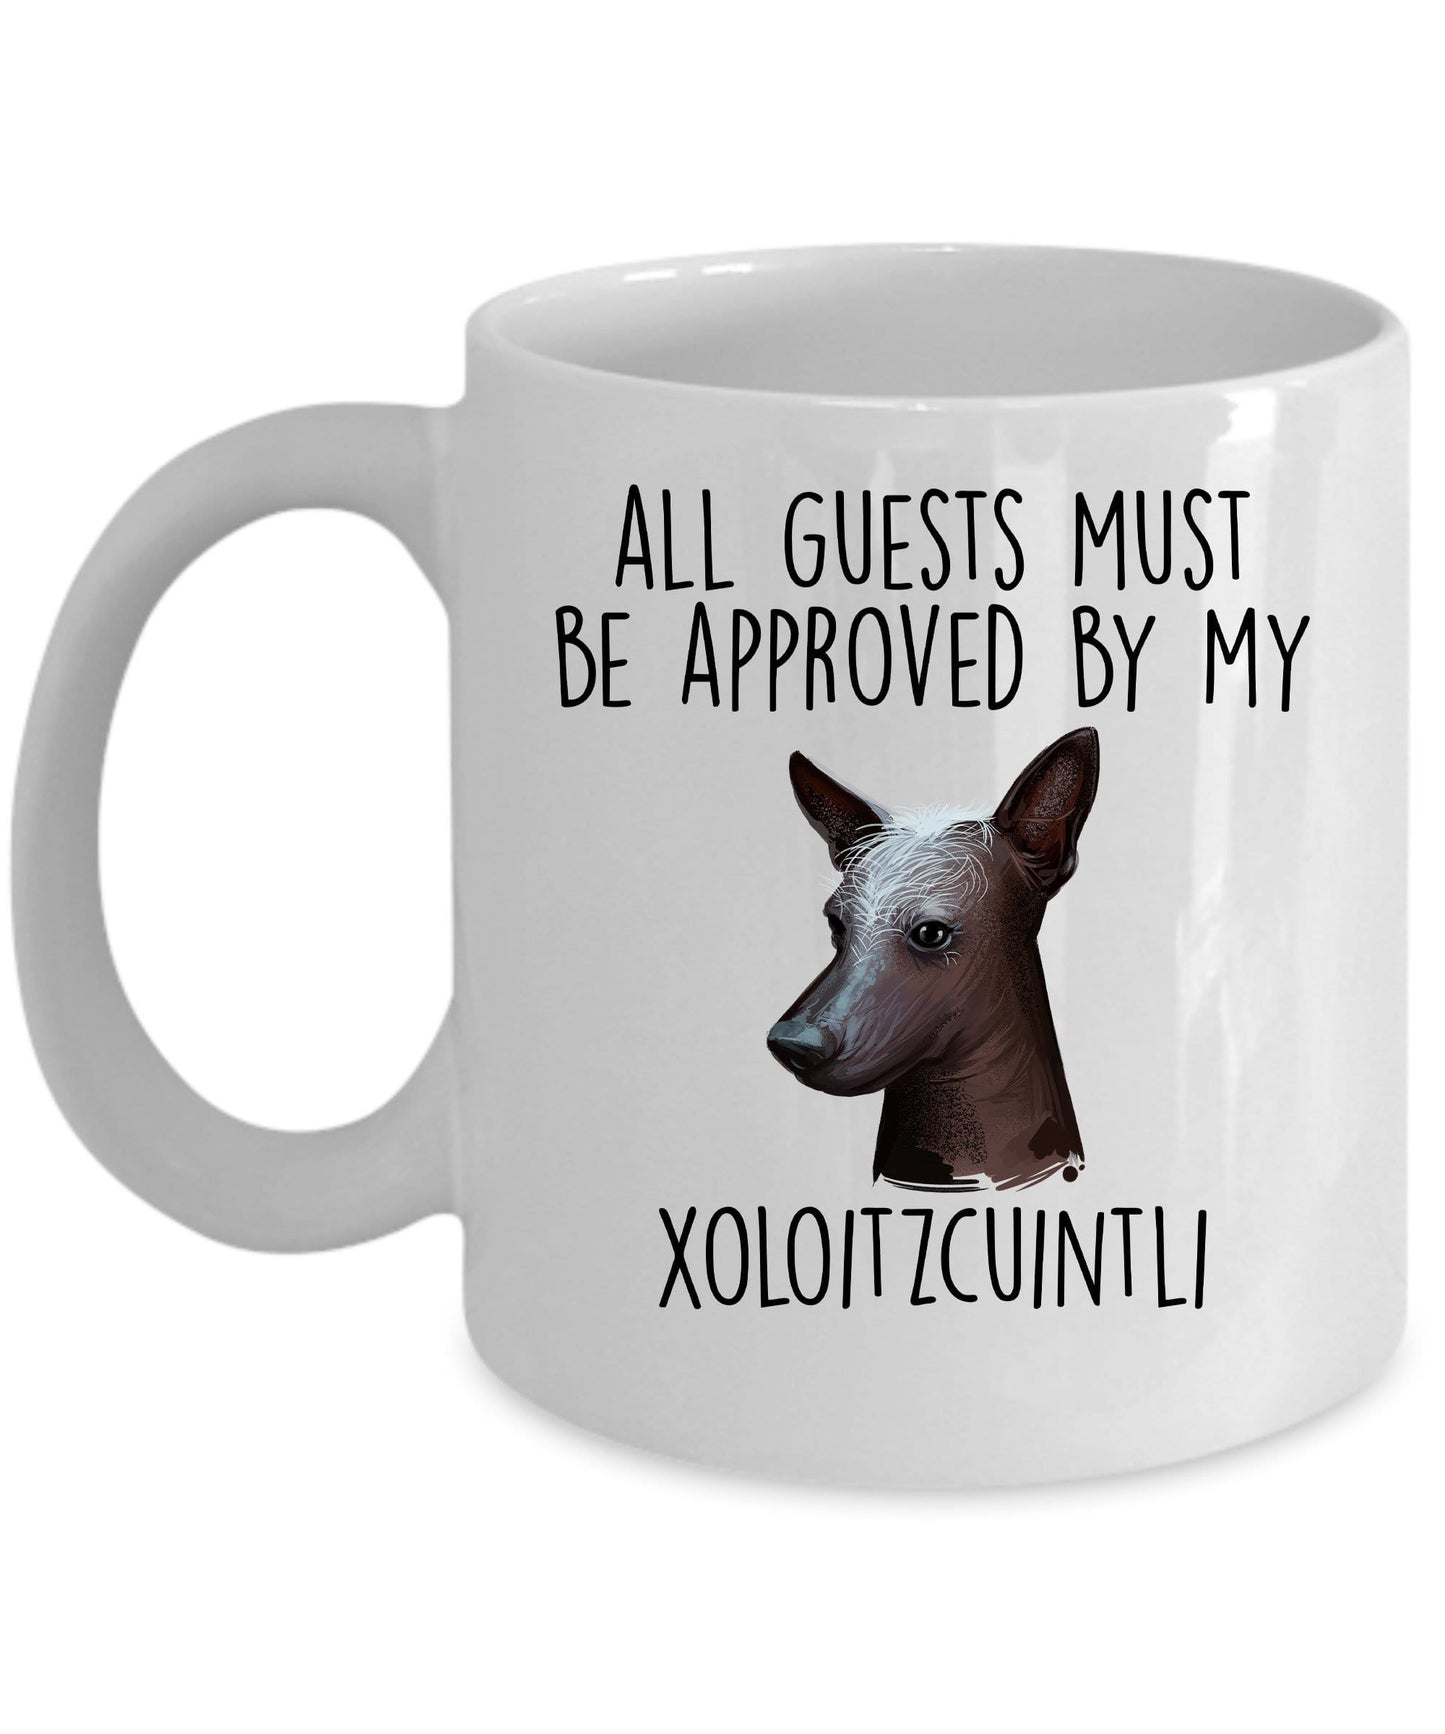 Xoloitzcuintli - Mexican Hairless Dog funny coffee Mug - All Guests must be approved